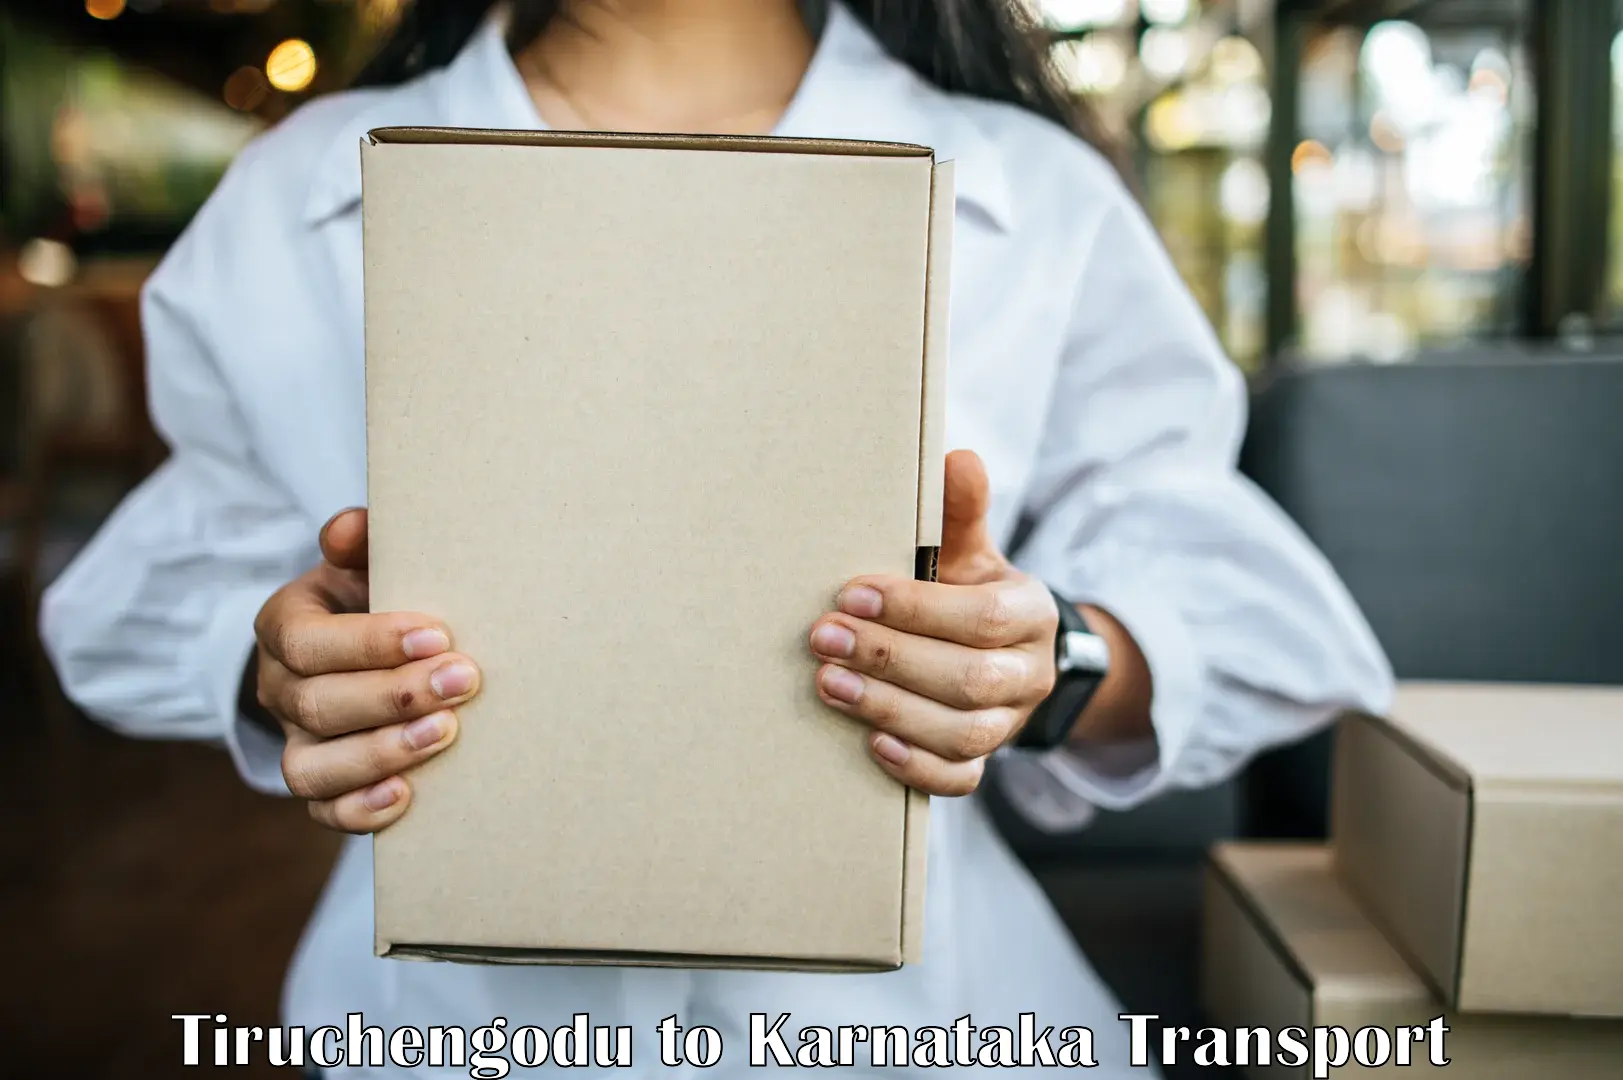 Truck transport companies in India Tiruchengodu to Manipal Academy of Higher Education